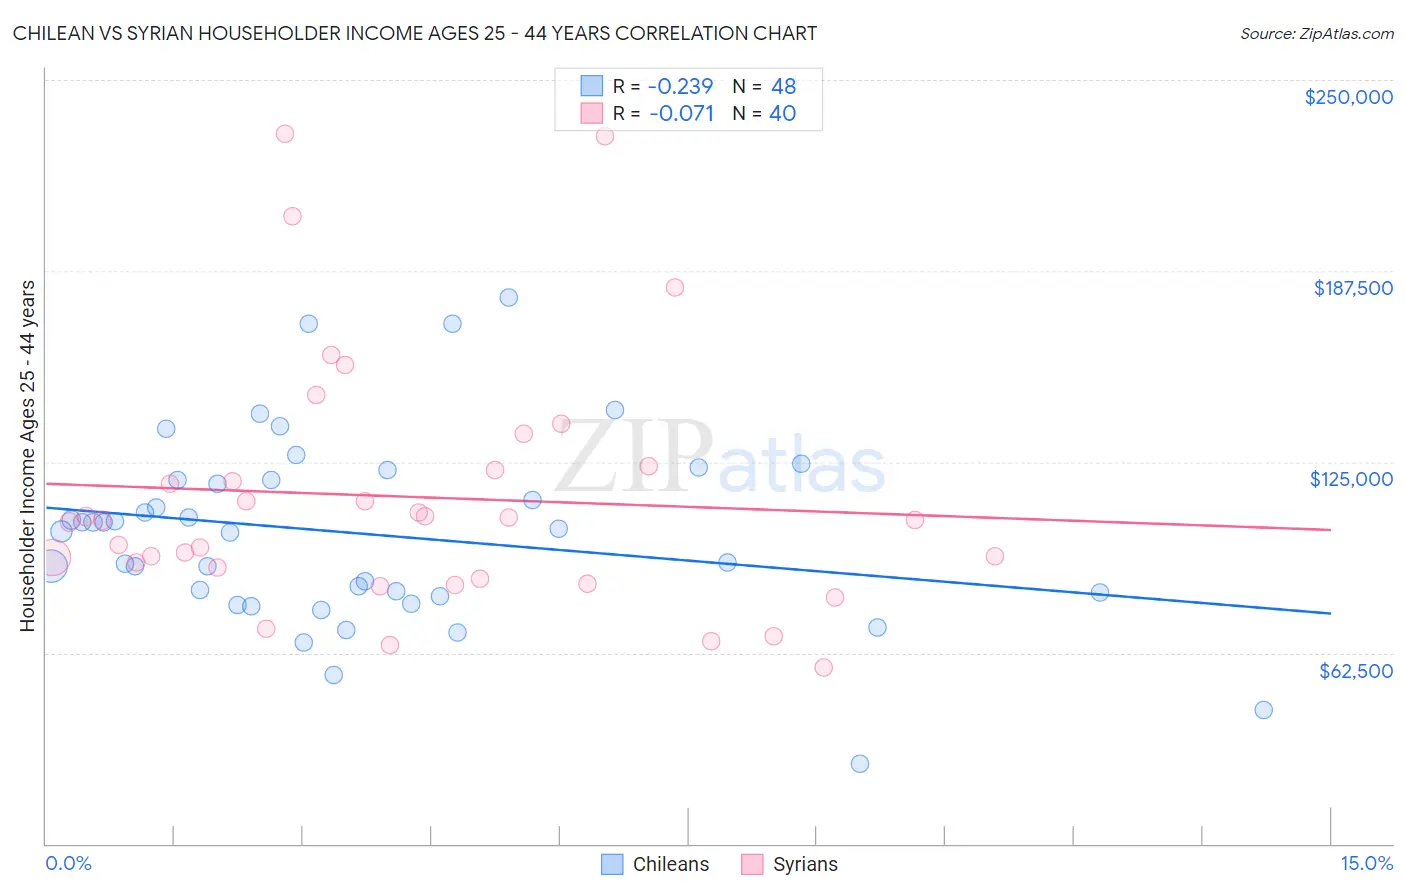 Chilean vs Syrian Householder Income Ages 25 - 44 years